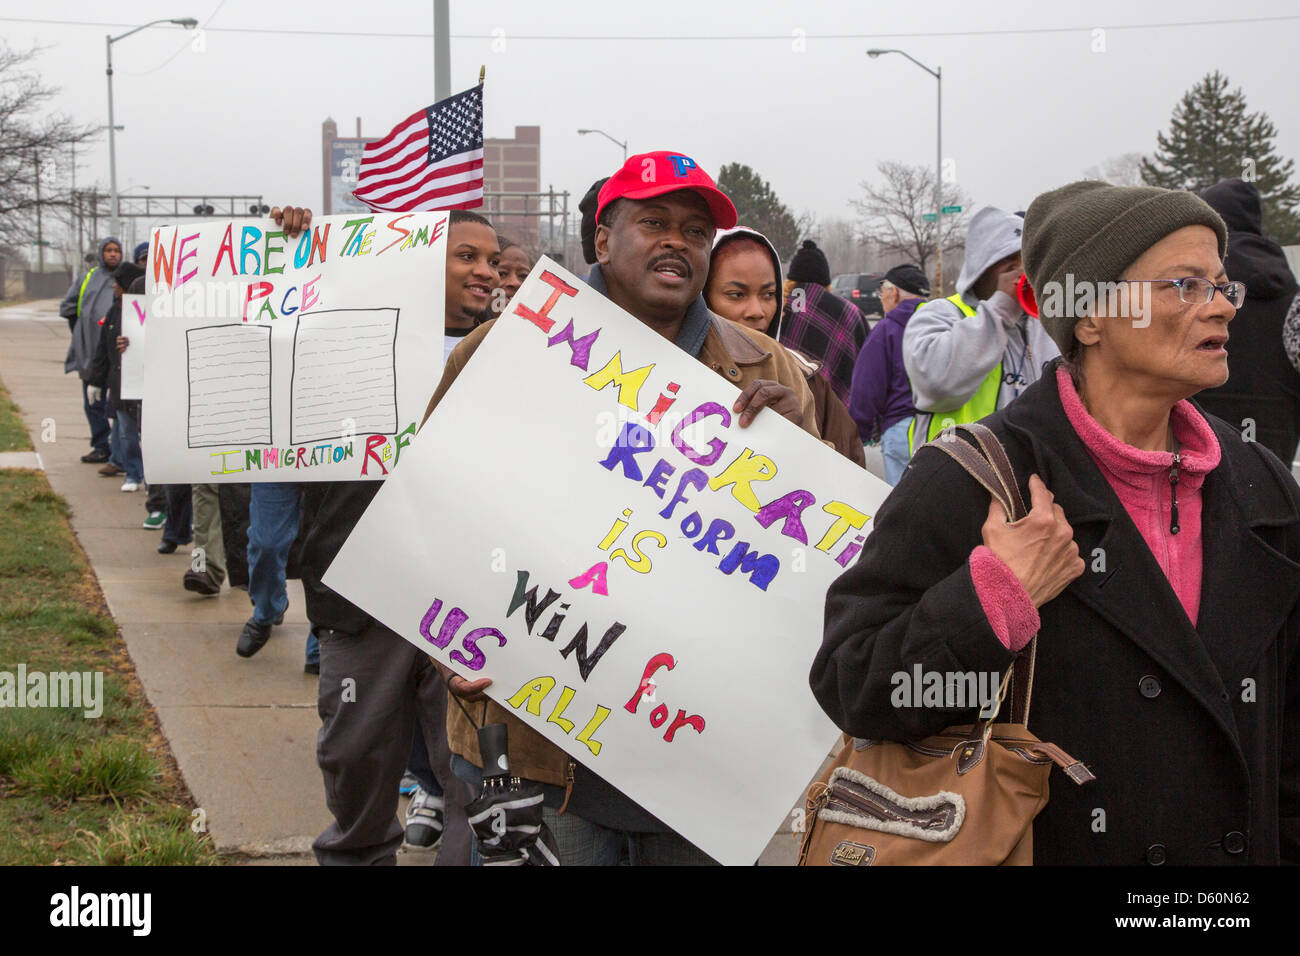 Detroit, Michigan, USA. Labor groups picket the office of the U.S. Citizenship and Immigration Services, calling for Congressional passage of immigration reform legislation. Credit: Jim West / Alamy Live News Stock Photo